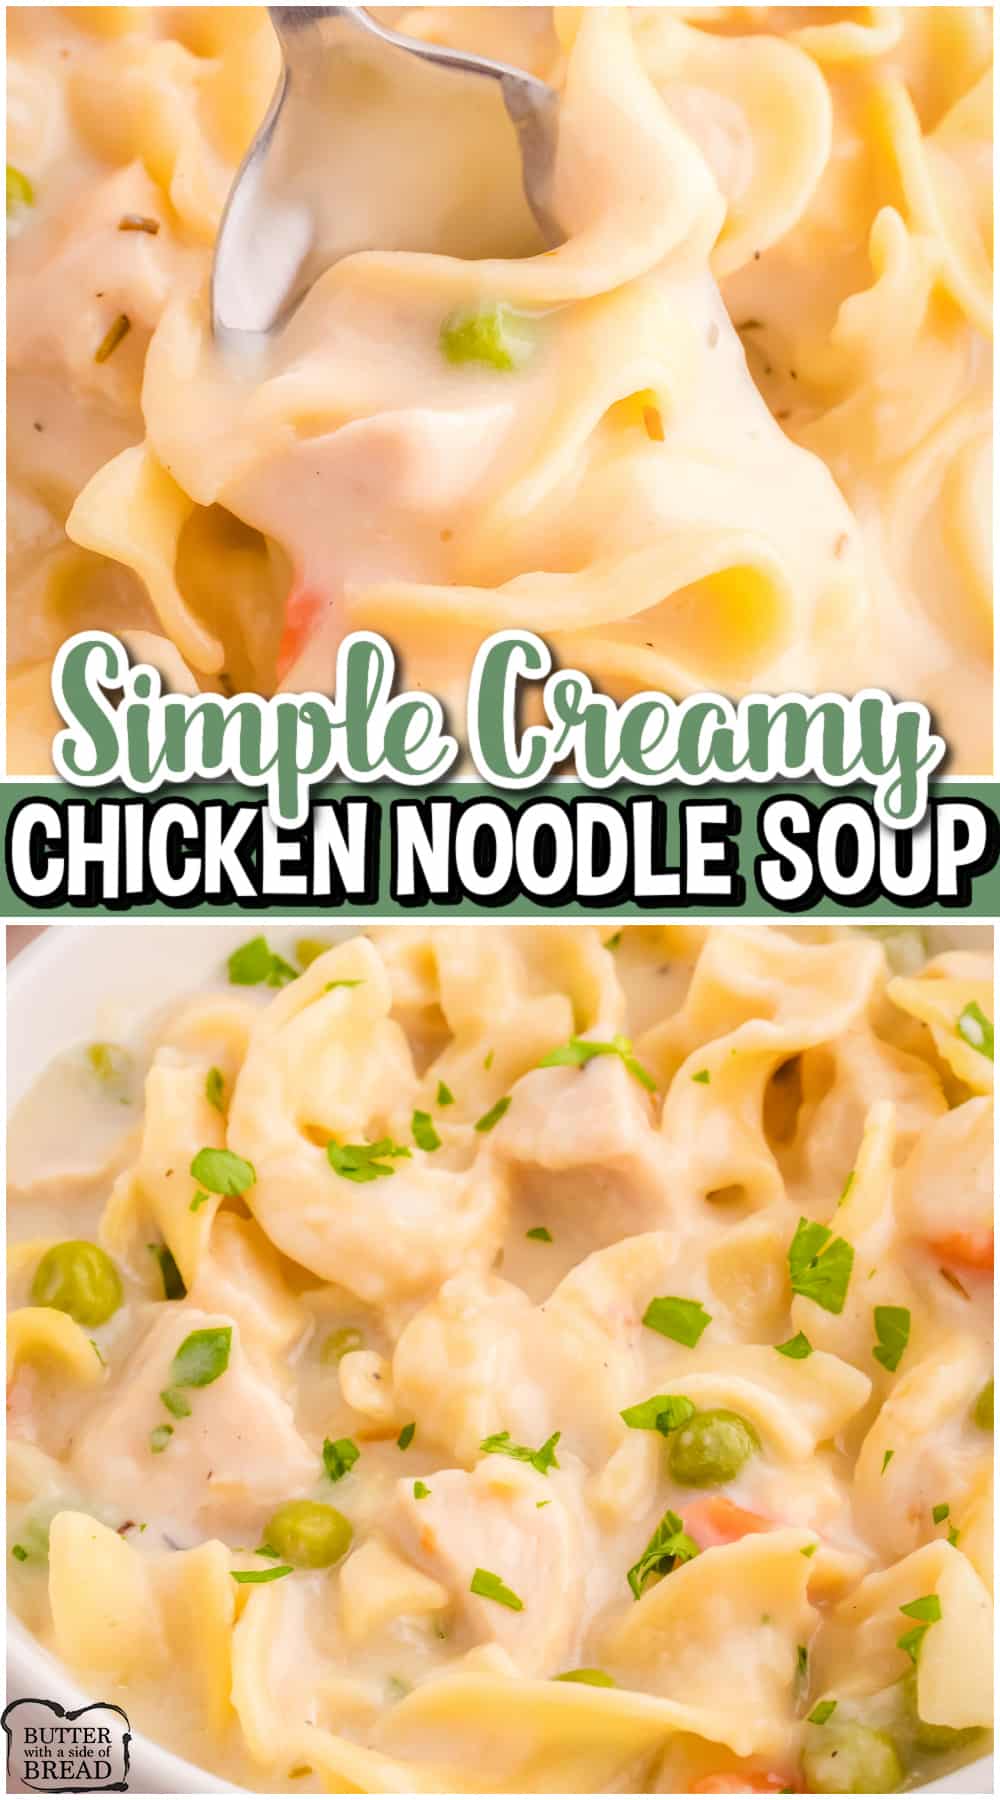 Grandma's BEST Creamy Chicken Noodle Soup is a warm, comforting classic recipe perfect for cold nights! This creamy chicken noodle soup recipe is loaded with tender egg noodles, onions, garlic, veggies and more!